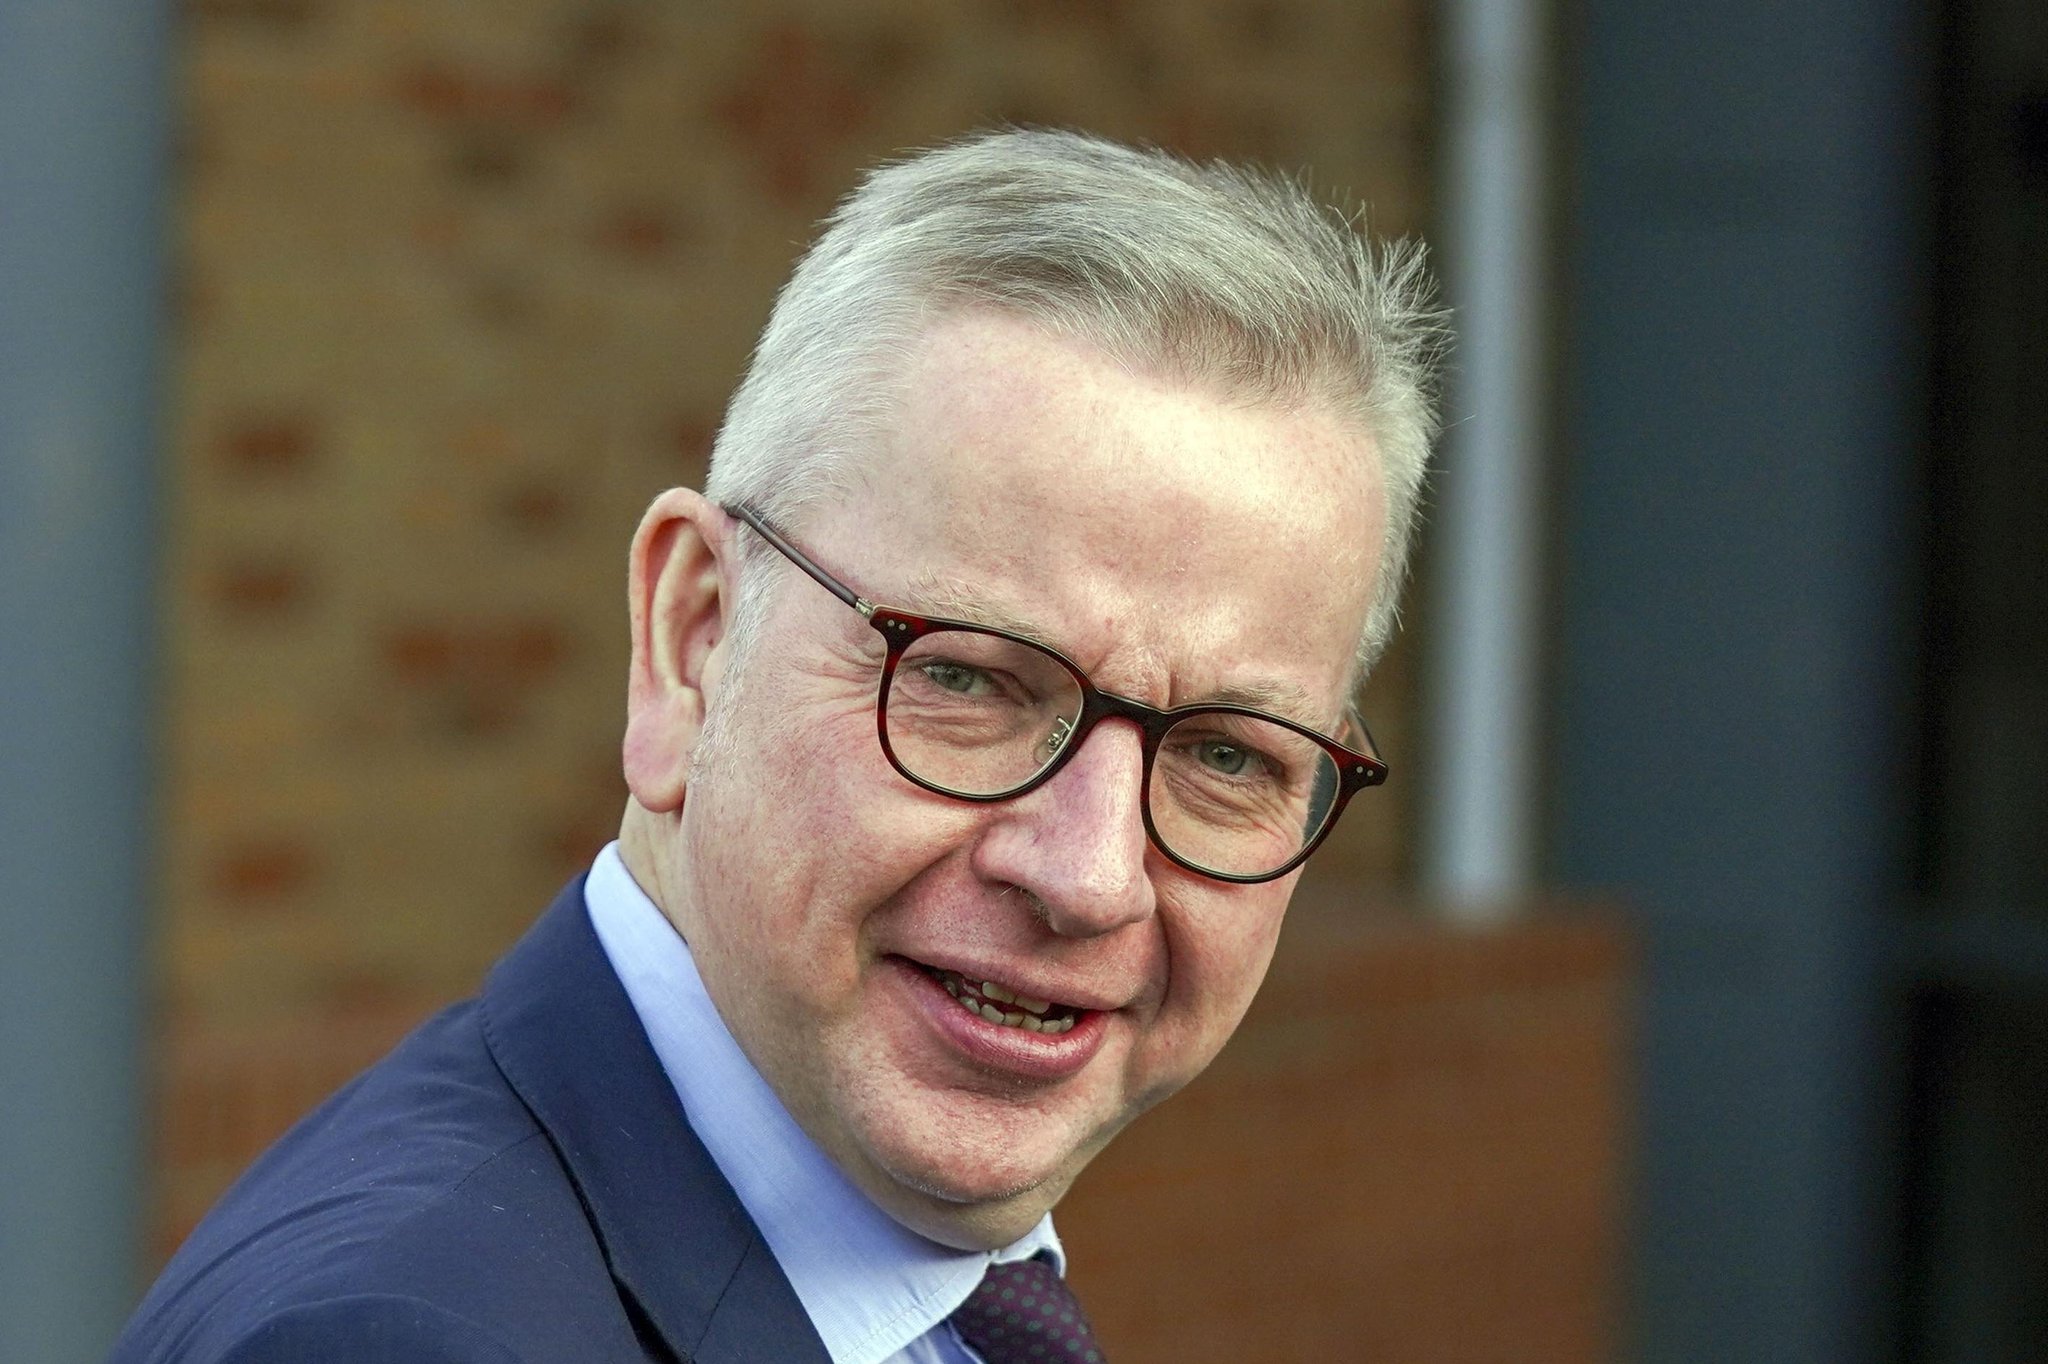 Gove under fire for 'silly voices' in TV interview